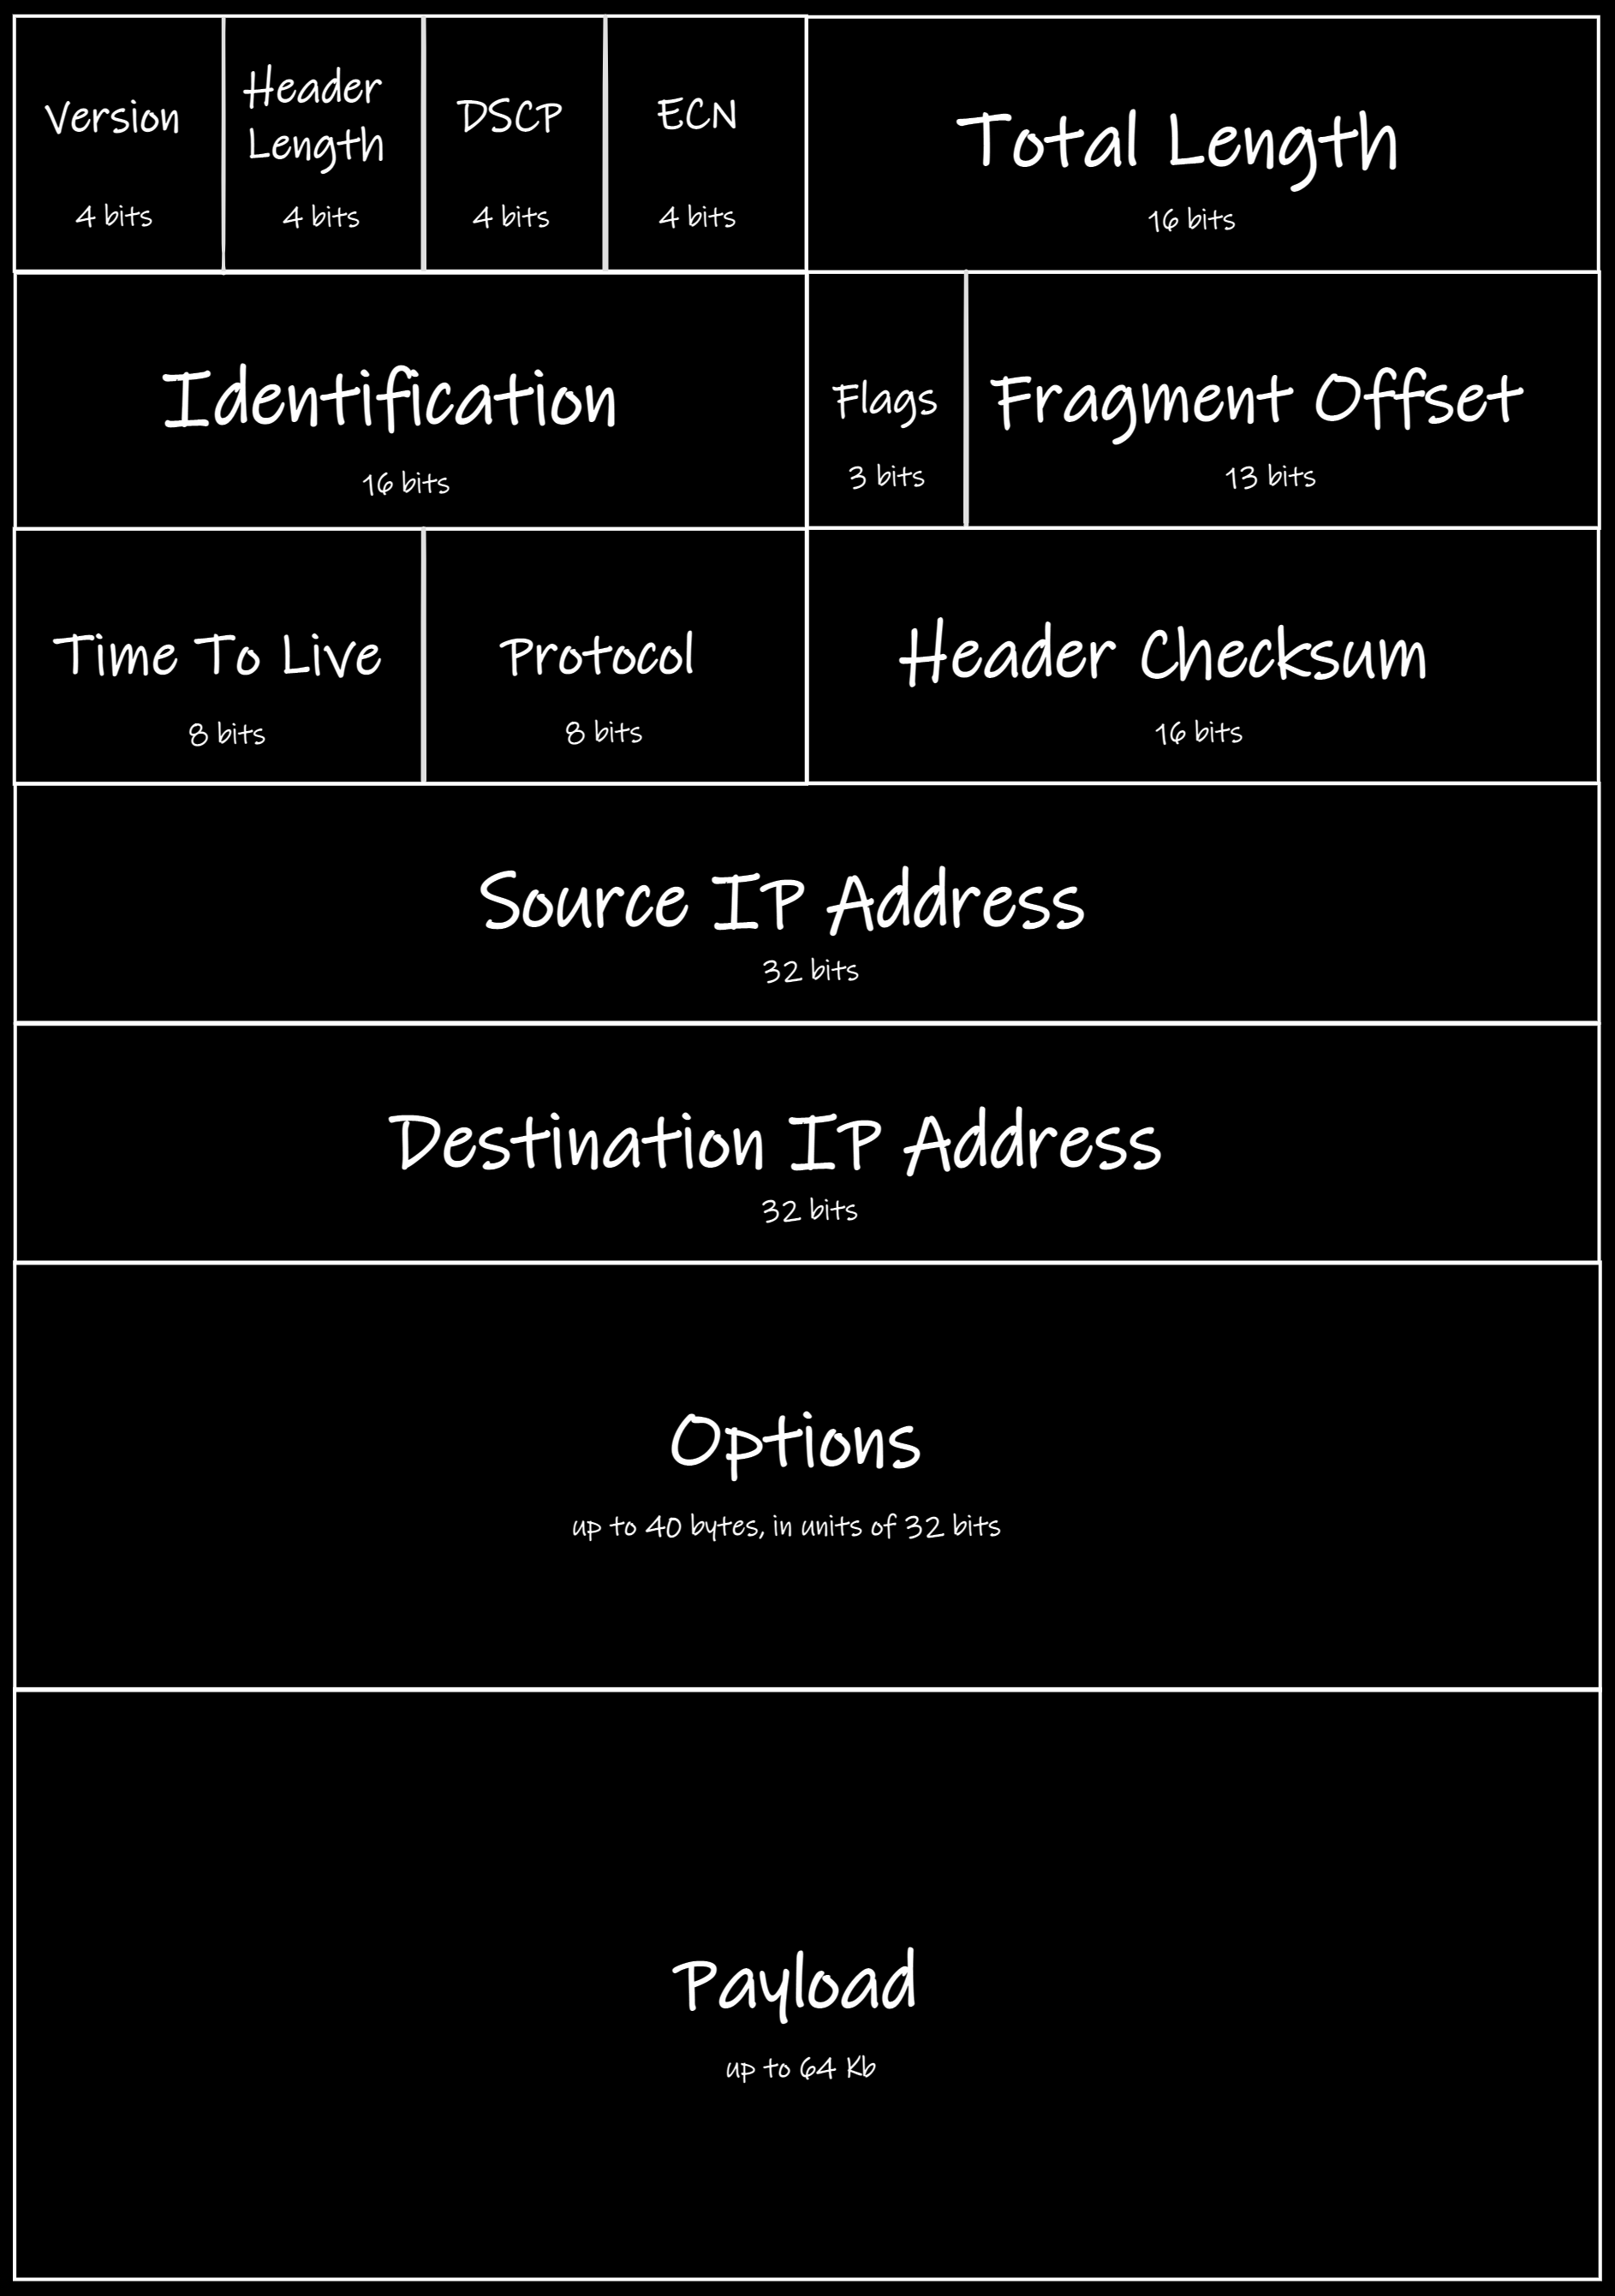 A representation of an Internet Protocol header with its length, identification, protocol, checksum, payload, etc.